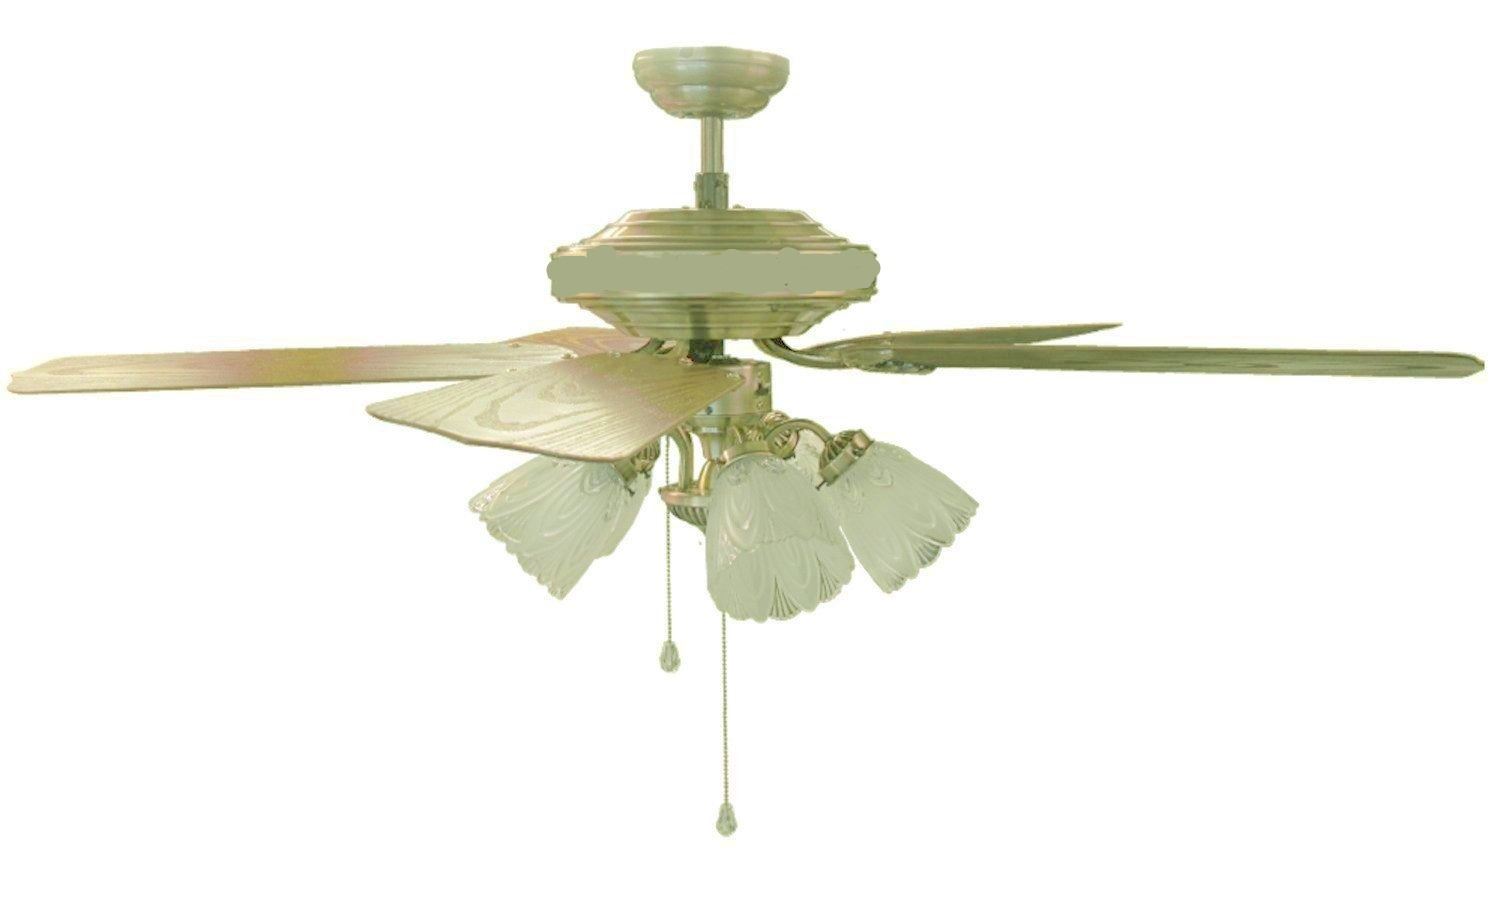 https://www.220stores.com/resize/Shared/Images/Product/Sakura-52-220-Volt-Brass-Ceiling-Fan-with-Four-Lights/imageedit_4_4650445897.jpg?